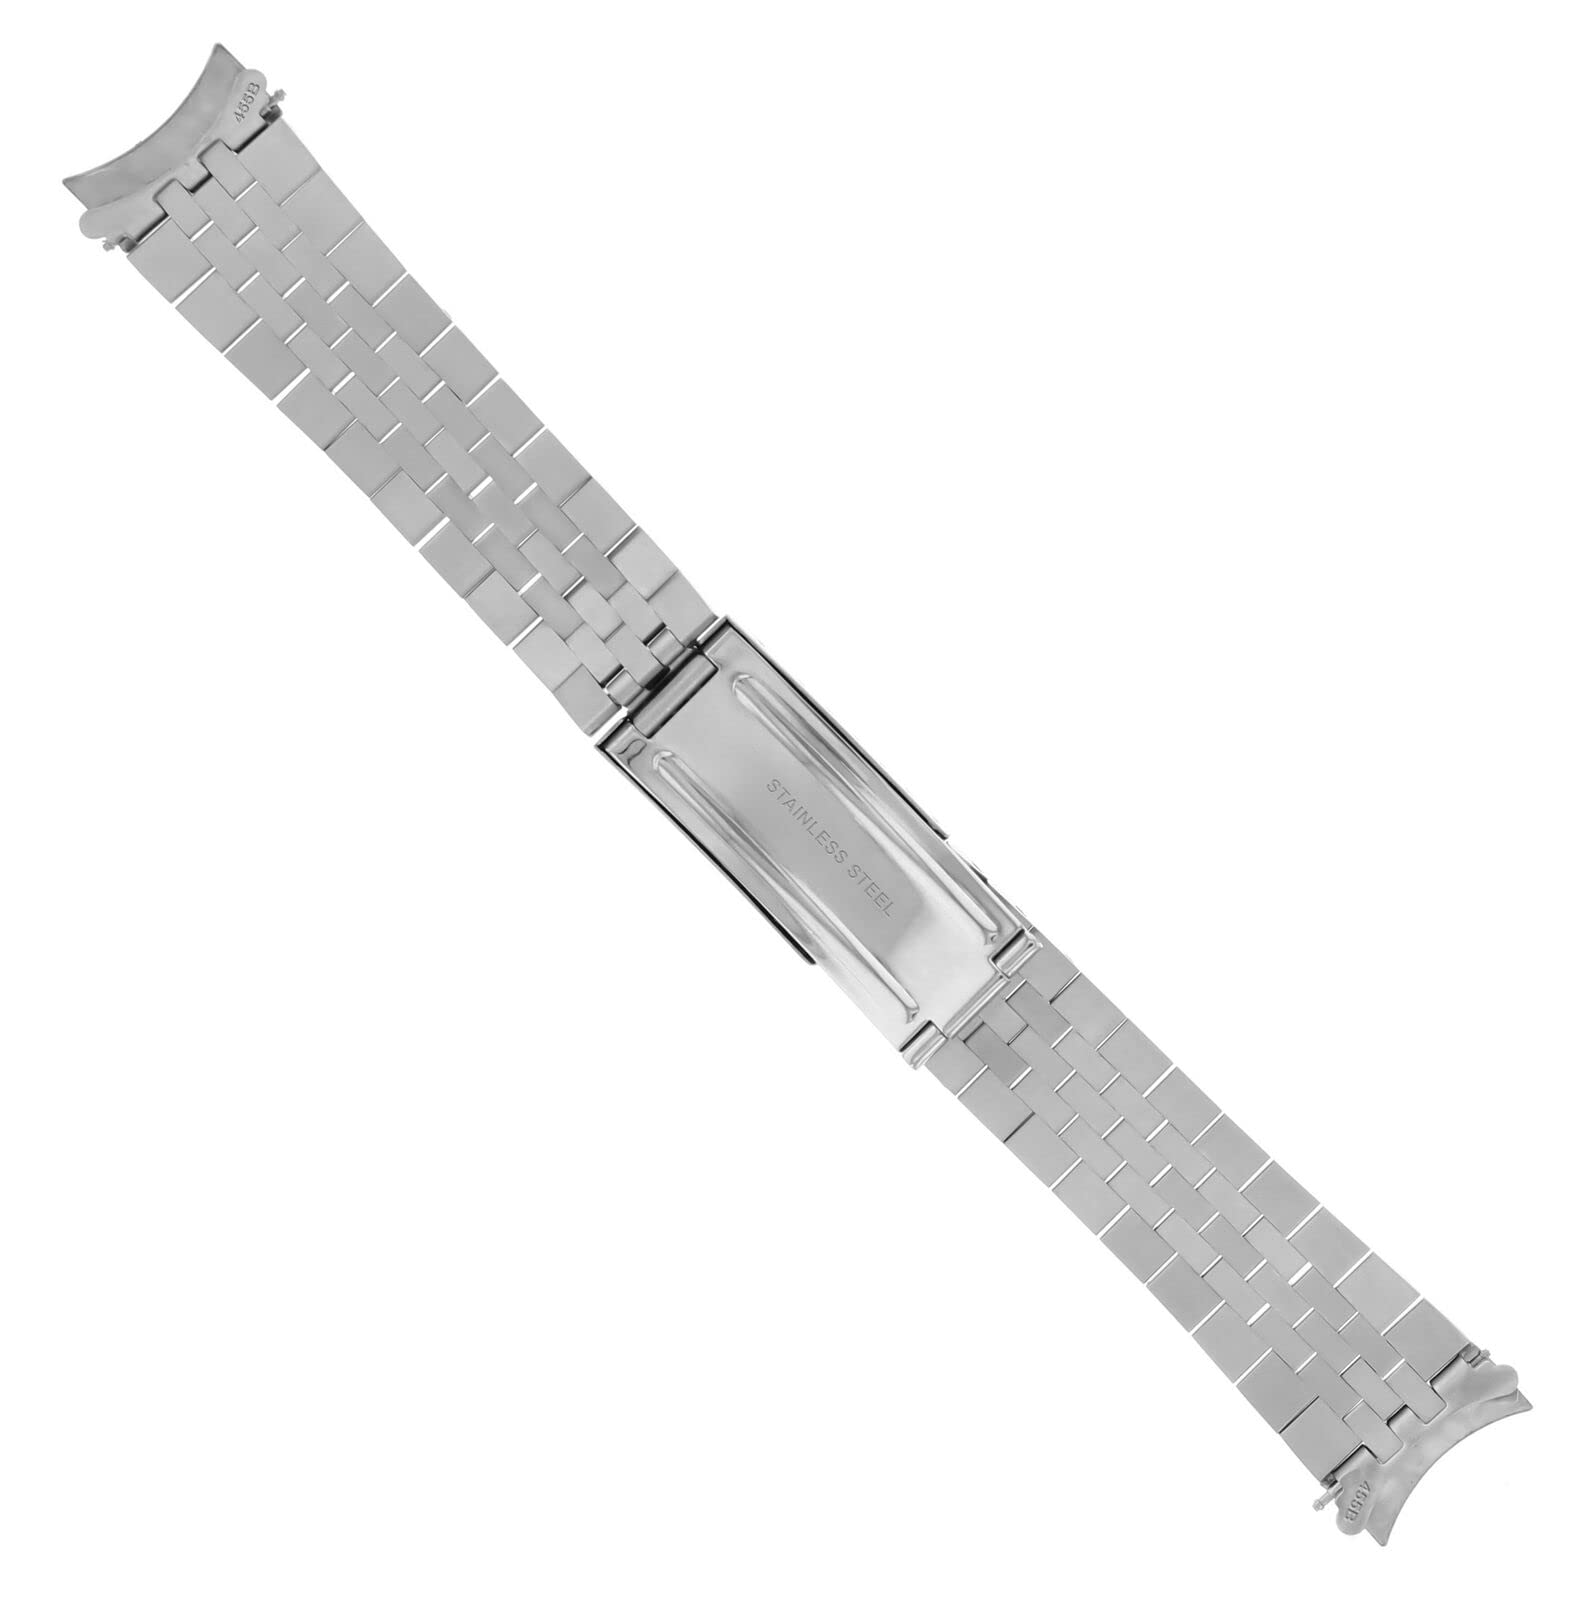 Ewatchparts 19MM JUBILEE WATCH BAND BRACELET FOR ROLEX AIR KING 1500, 5500 HEAVY STAINLESS